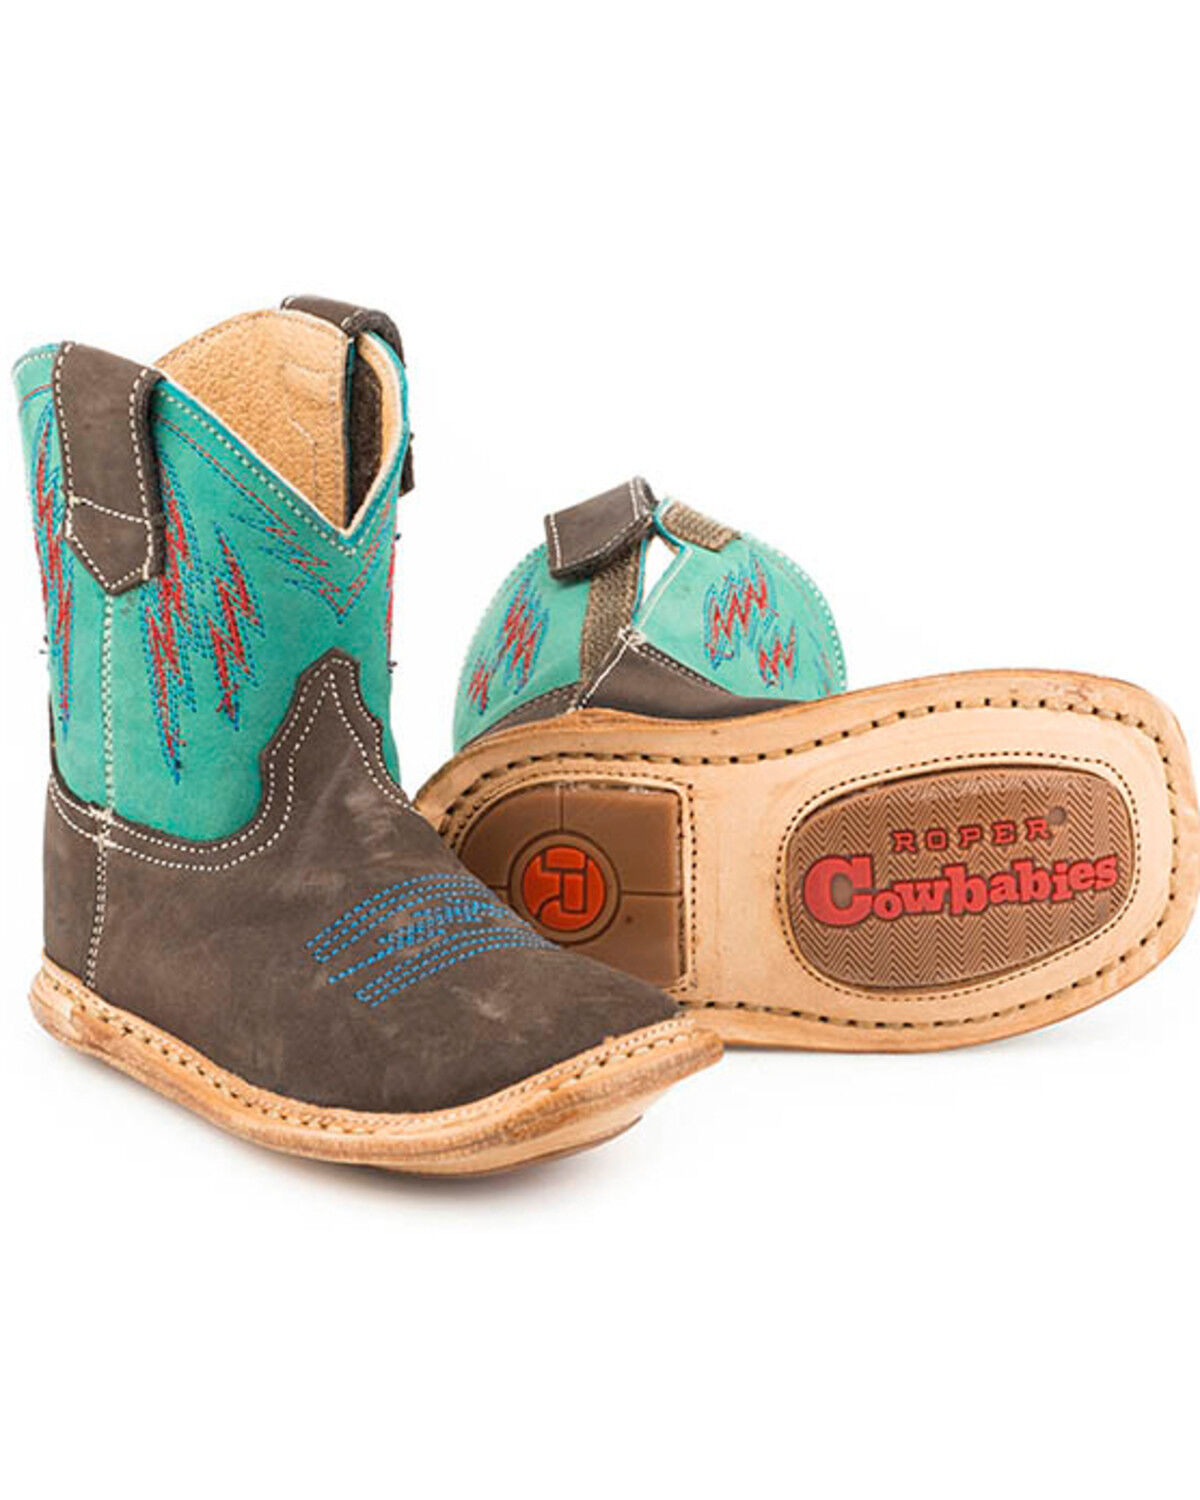 Old West Kids Boots Unisex-Baby Poppets Infant/Toddler boots 